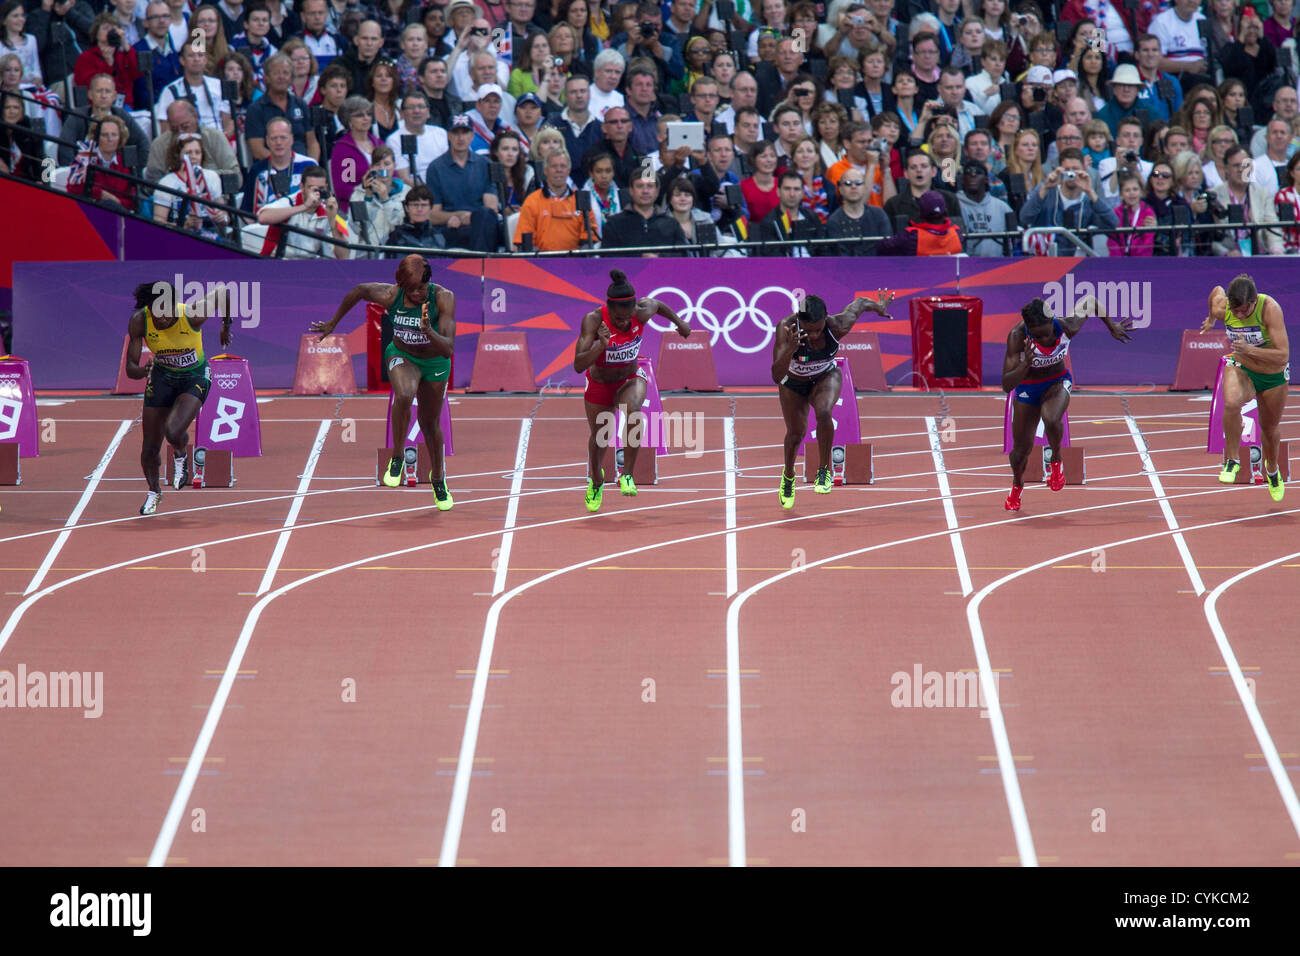 Start of the Women's 100 meter semifinal at the Olympic Summer Games, London 2012 Stock Photo